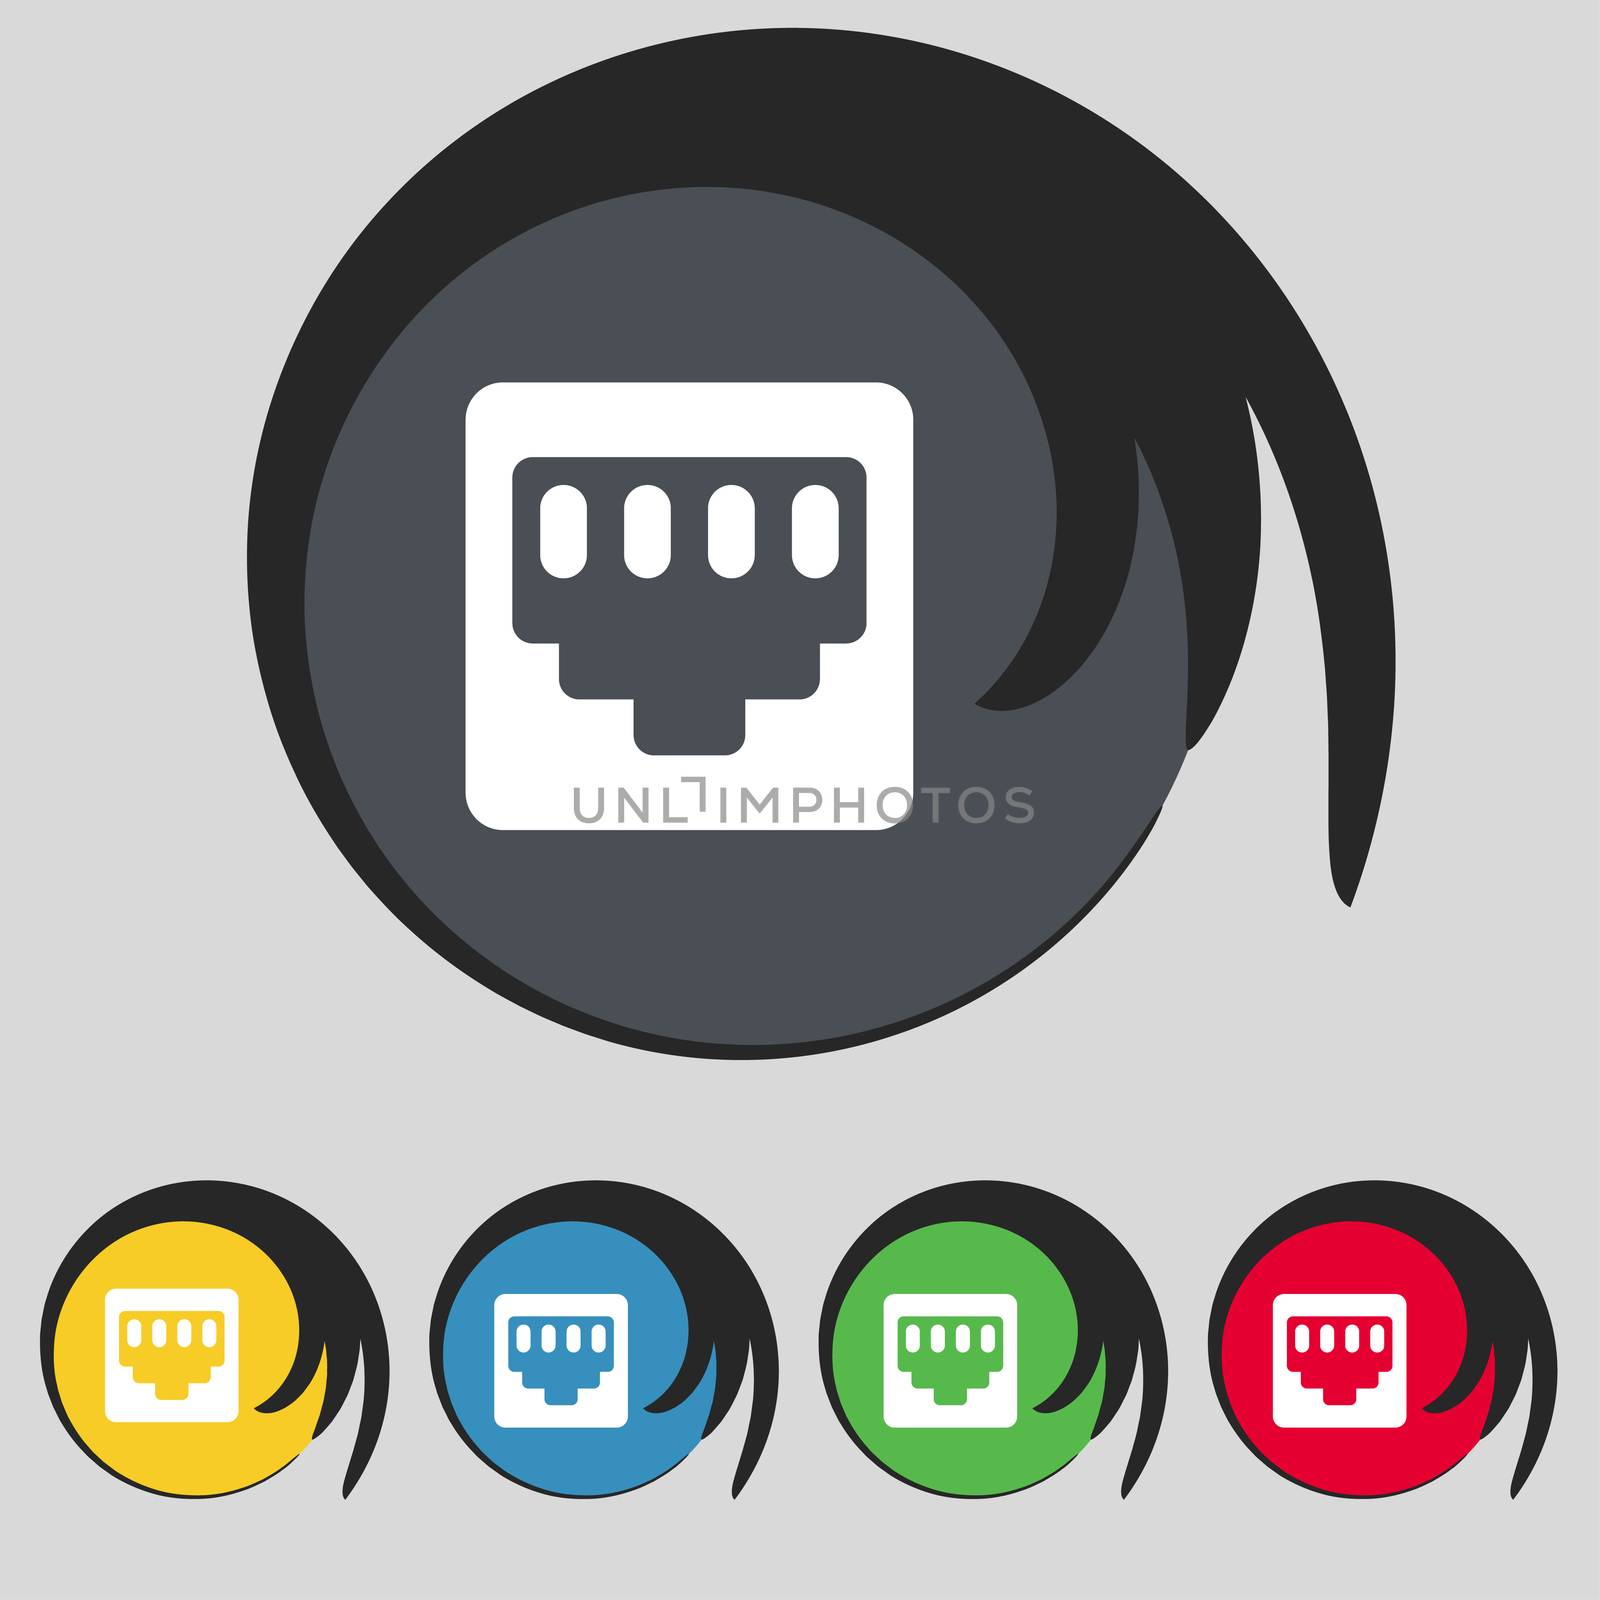 cable rj45, Patch Cord icon sign. Symbol on five colored buttons. illustration